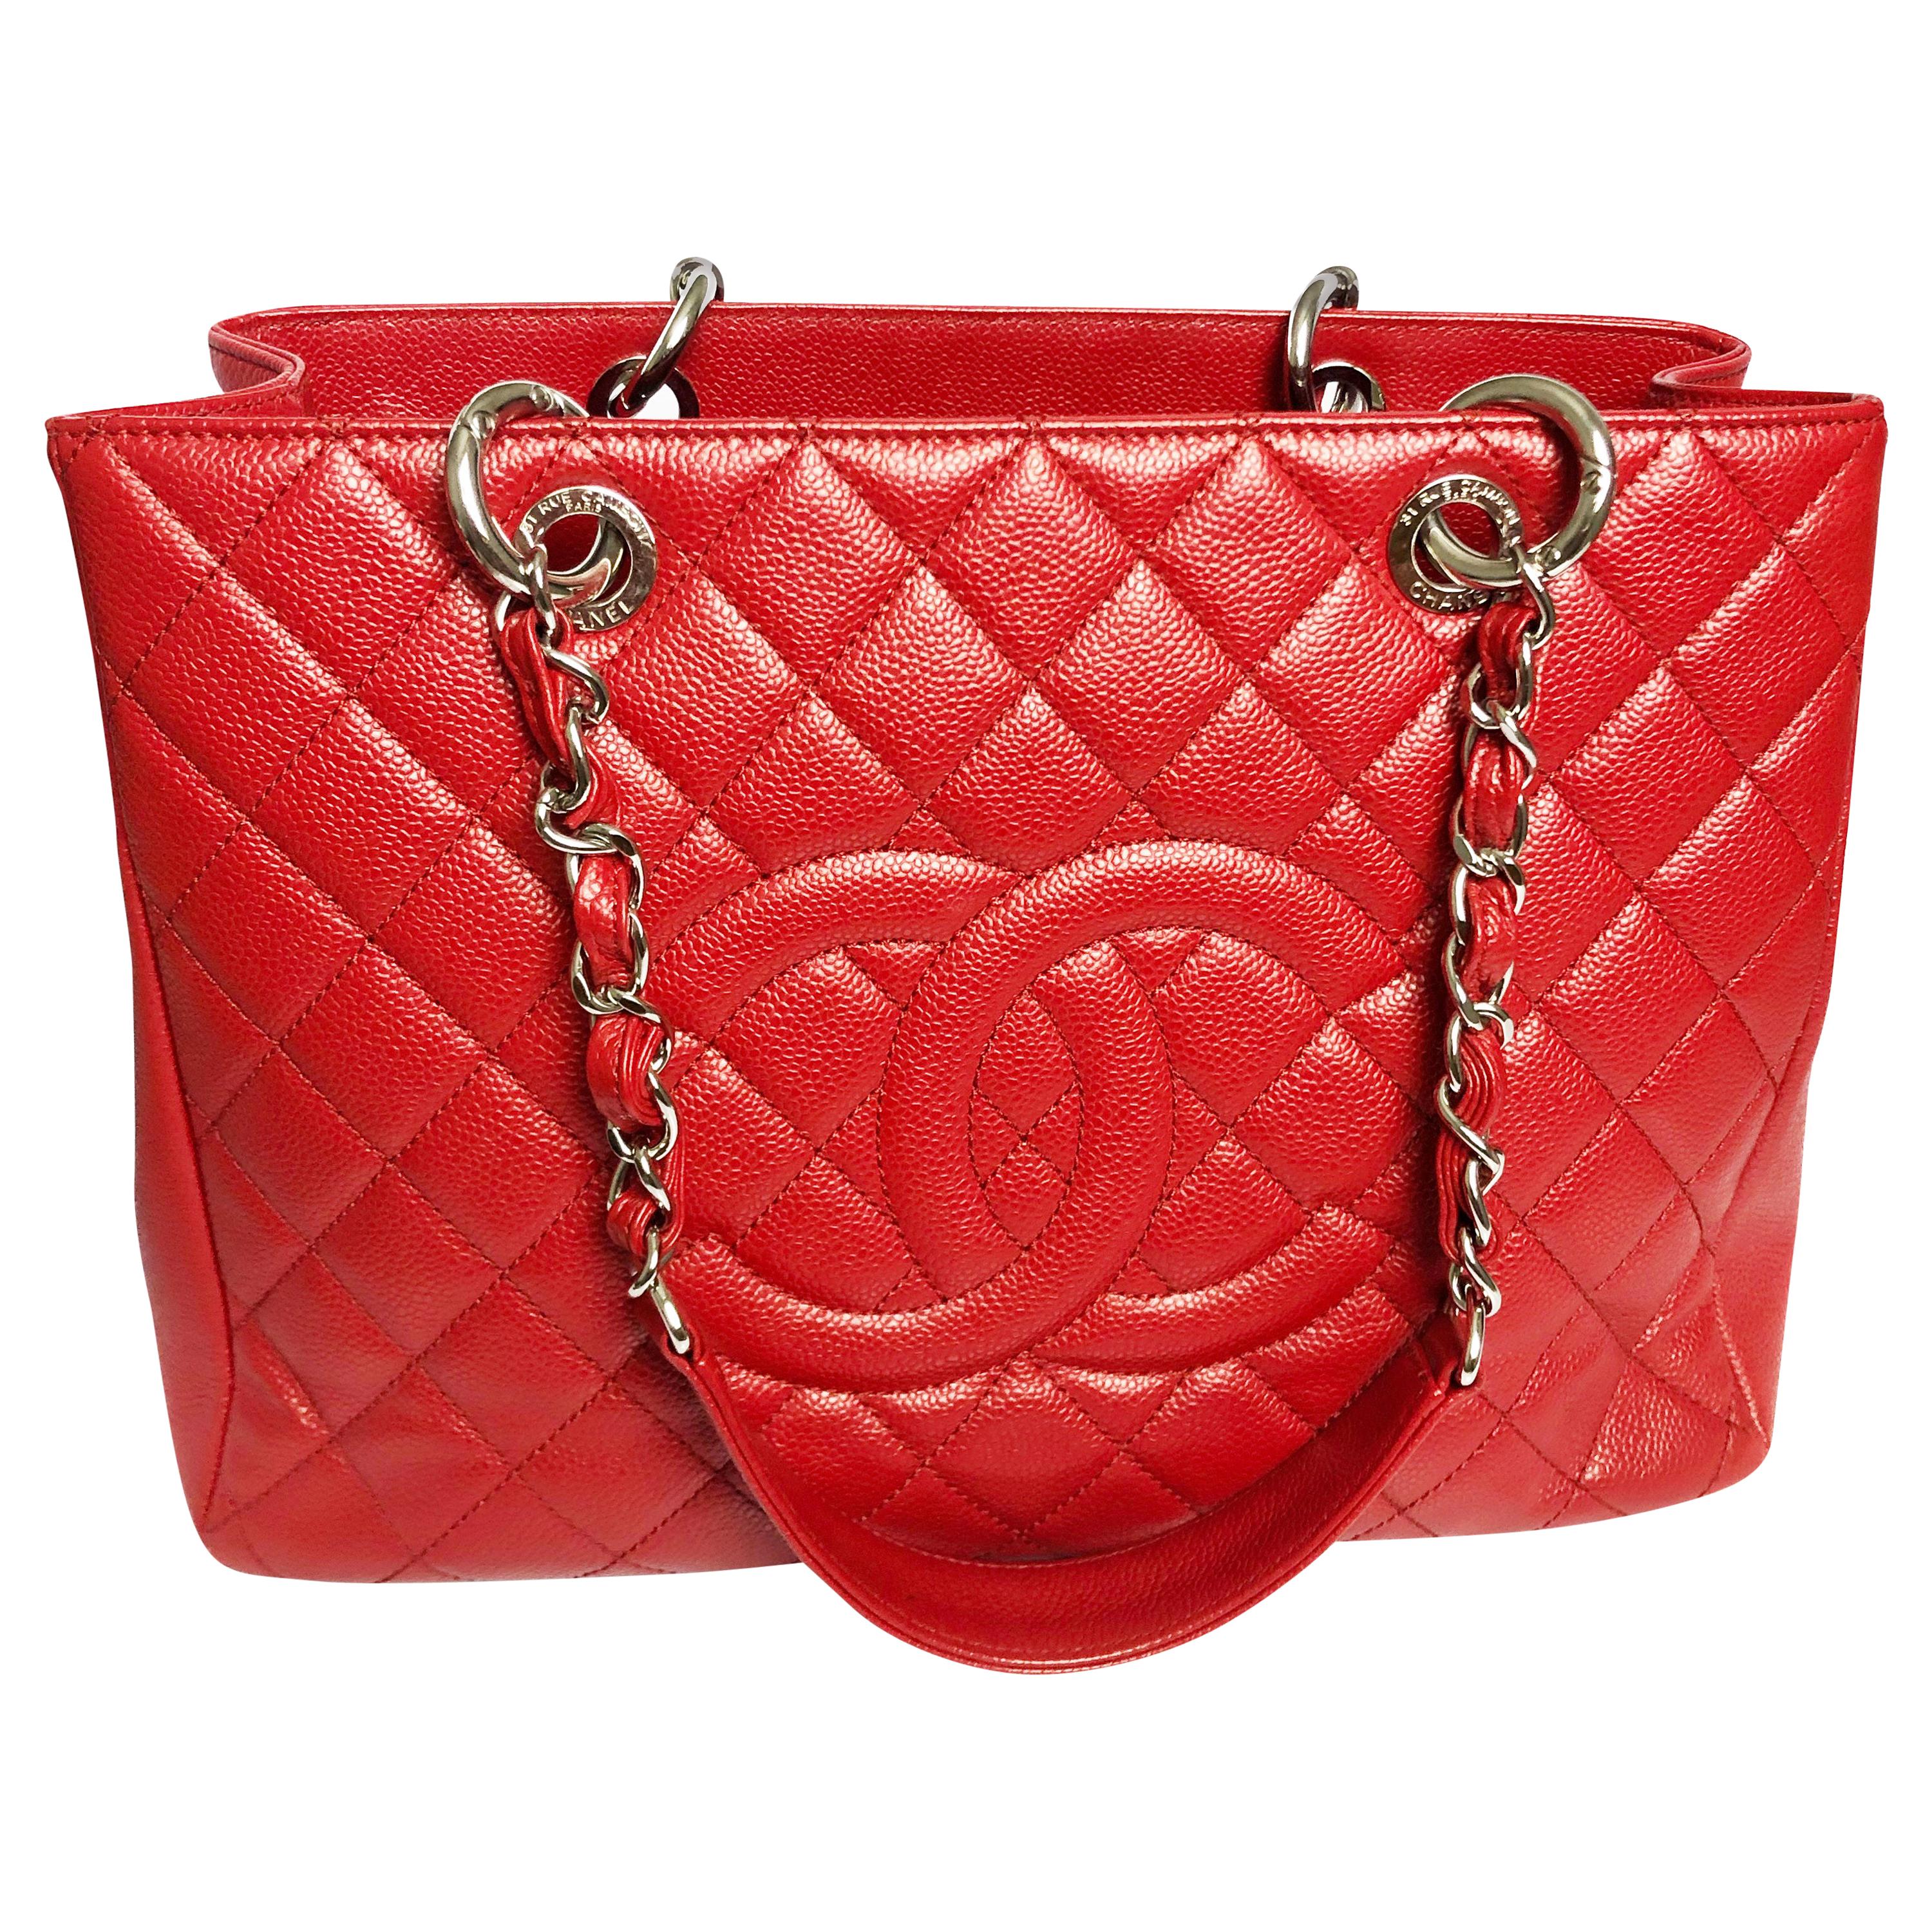 Authentic, preowned Chanel GST Grand Shopping Tote in red caviar leather with silver hardware from the 2013 collection.  Made from red caviar diamond-quilted or matelasse leather, it features a slip pocket in back, silver chain link and red leather